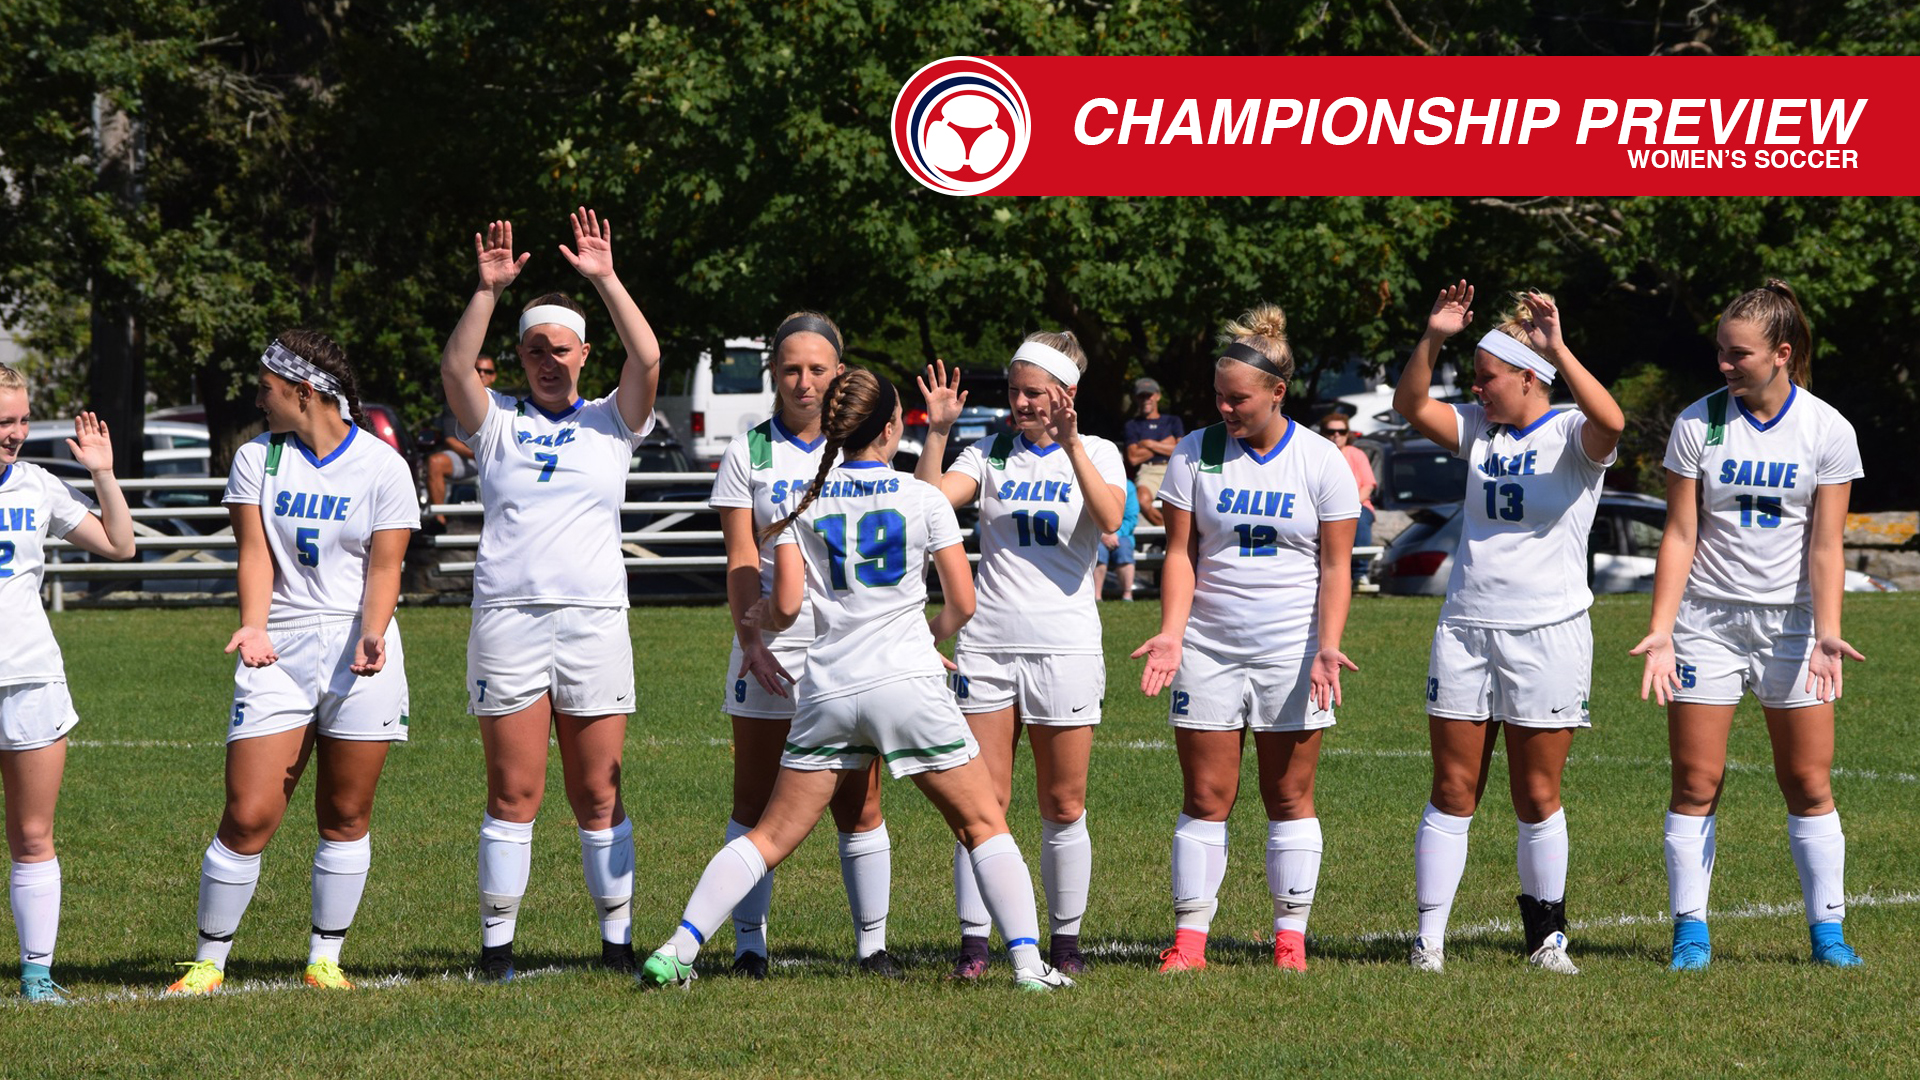 Salve Regina women's soccer has earned the No. 7 seed in the 2017 Commonwealth Coast Conference (CCC) Championships.